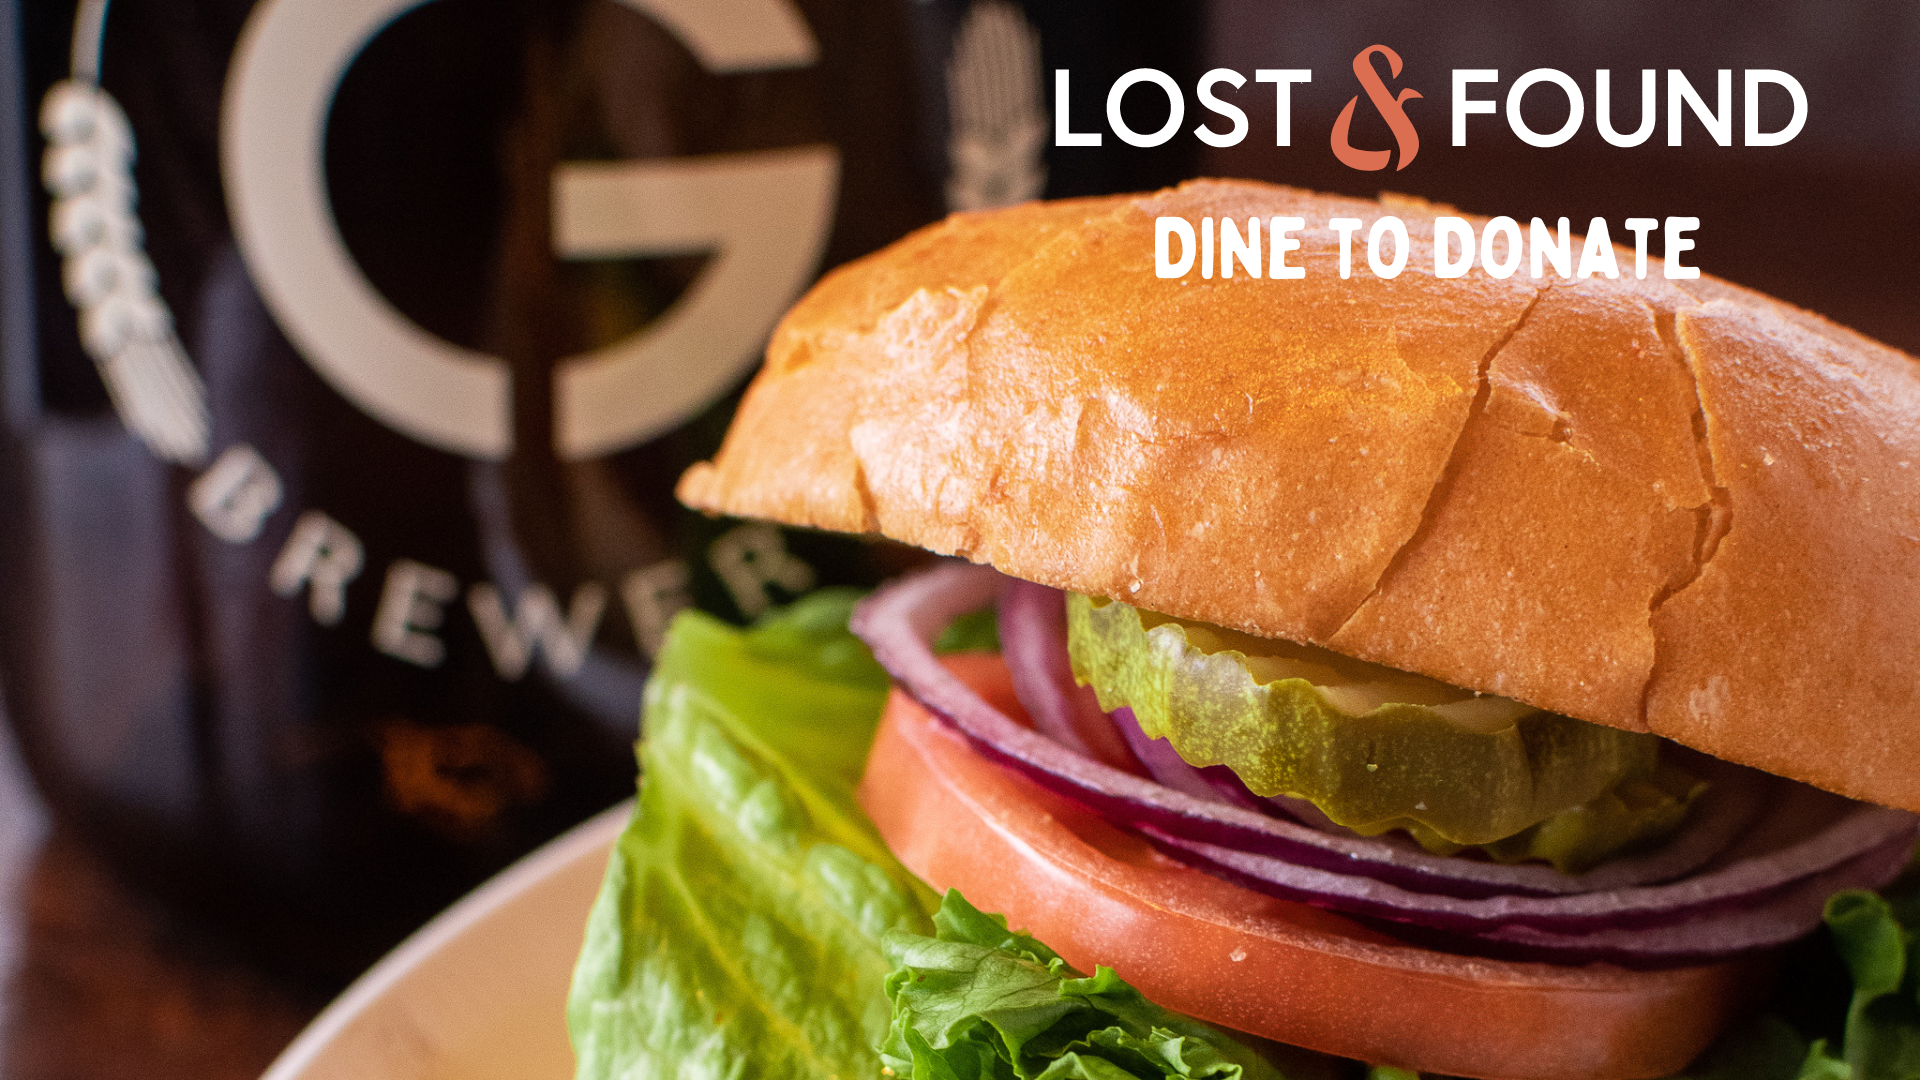 Close-up photo of a burger and growler of beer. Text overlay shows the Lost&Found logo and the words "dine to donate".